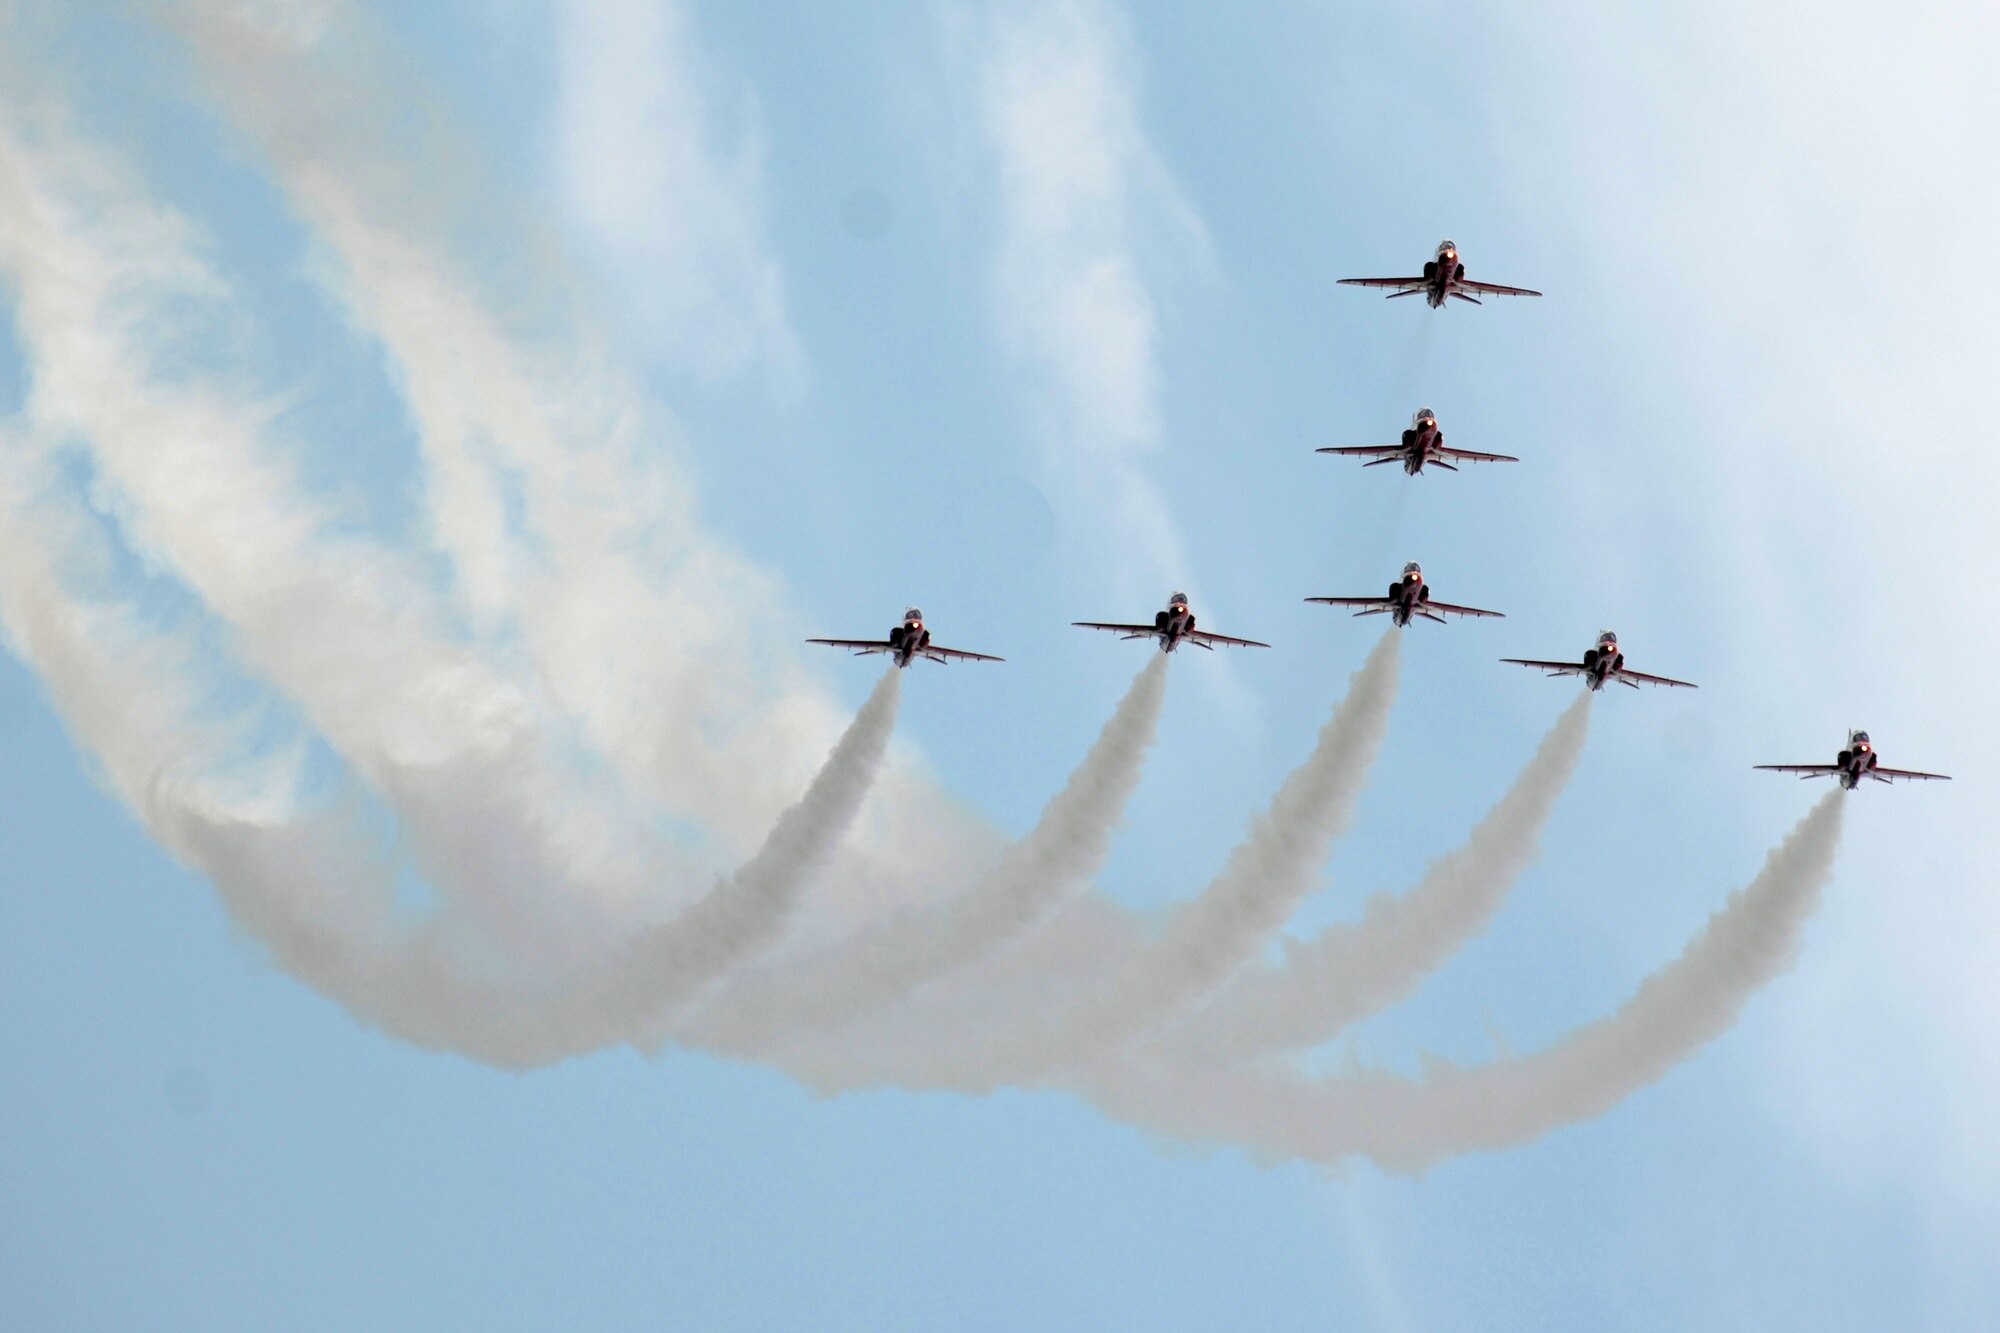 RAF FAIRFORD, United Kingdom - The Royal Air Force Red Arrows perform during the Royal International Air Tattoo here July 8. More than 130,000 people attended the tattoo. (U.S. Air Force photo by Master Sgt. John Barton)